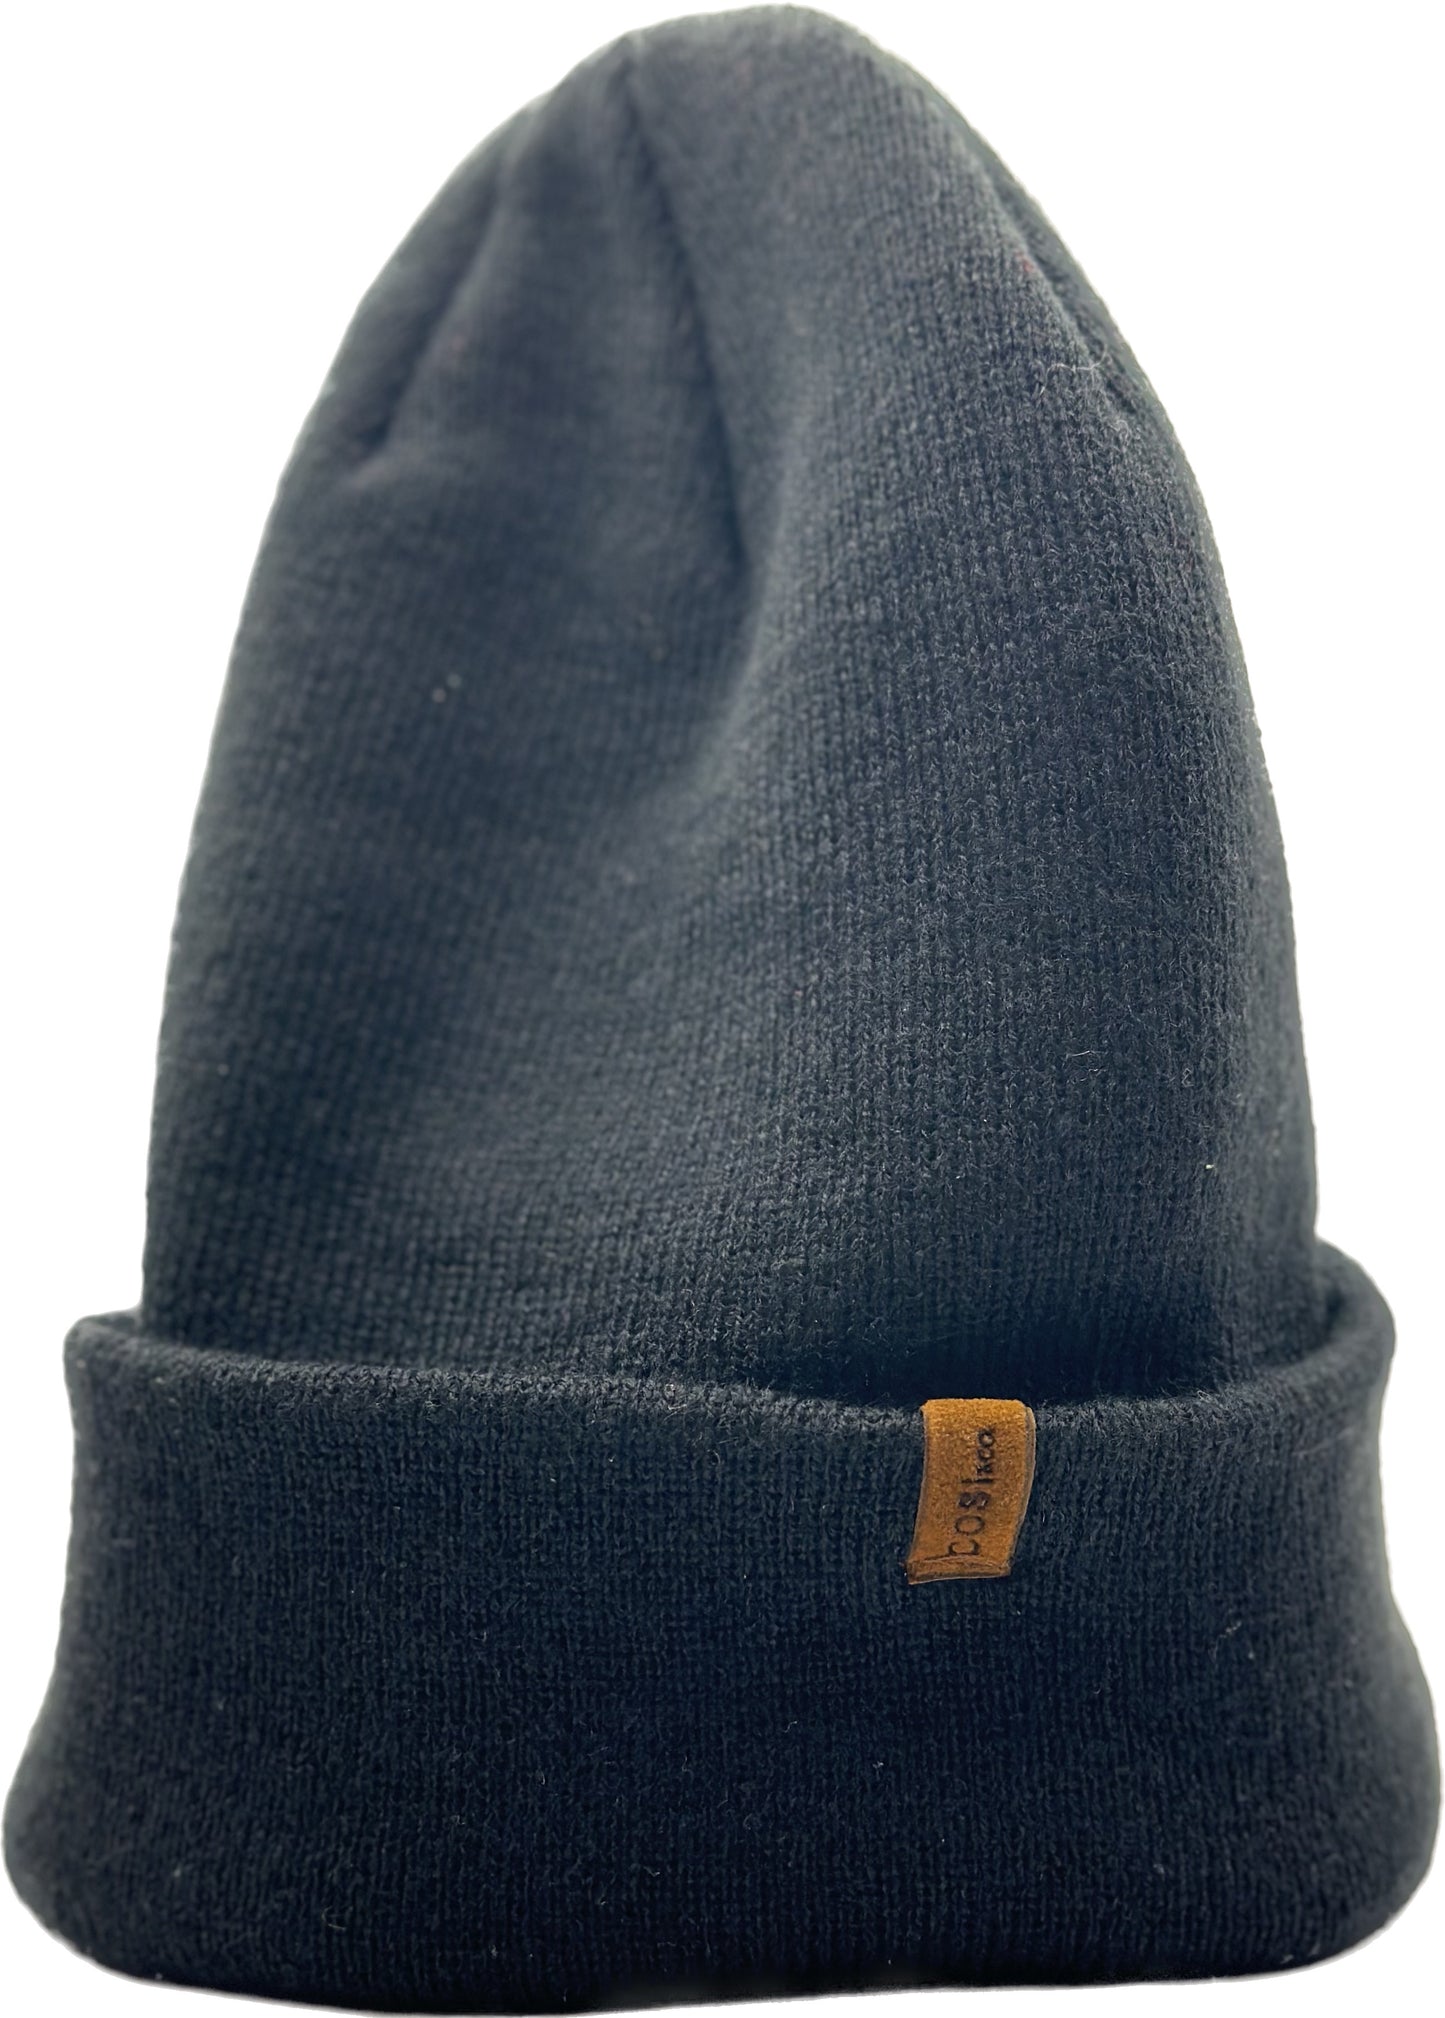 THE FIT BEANIE IN BLACK - COSI & co.